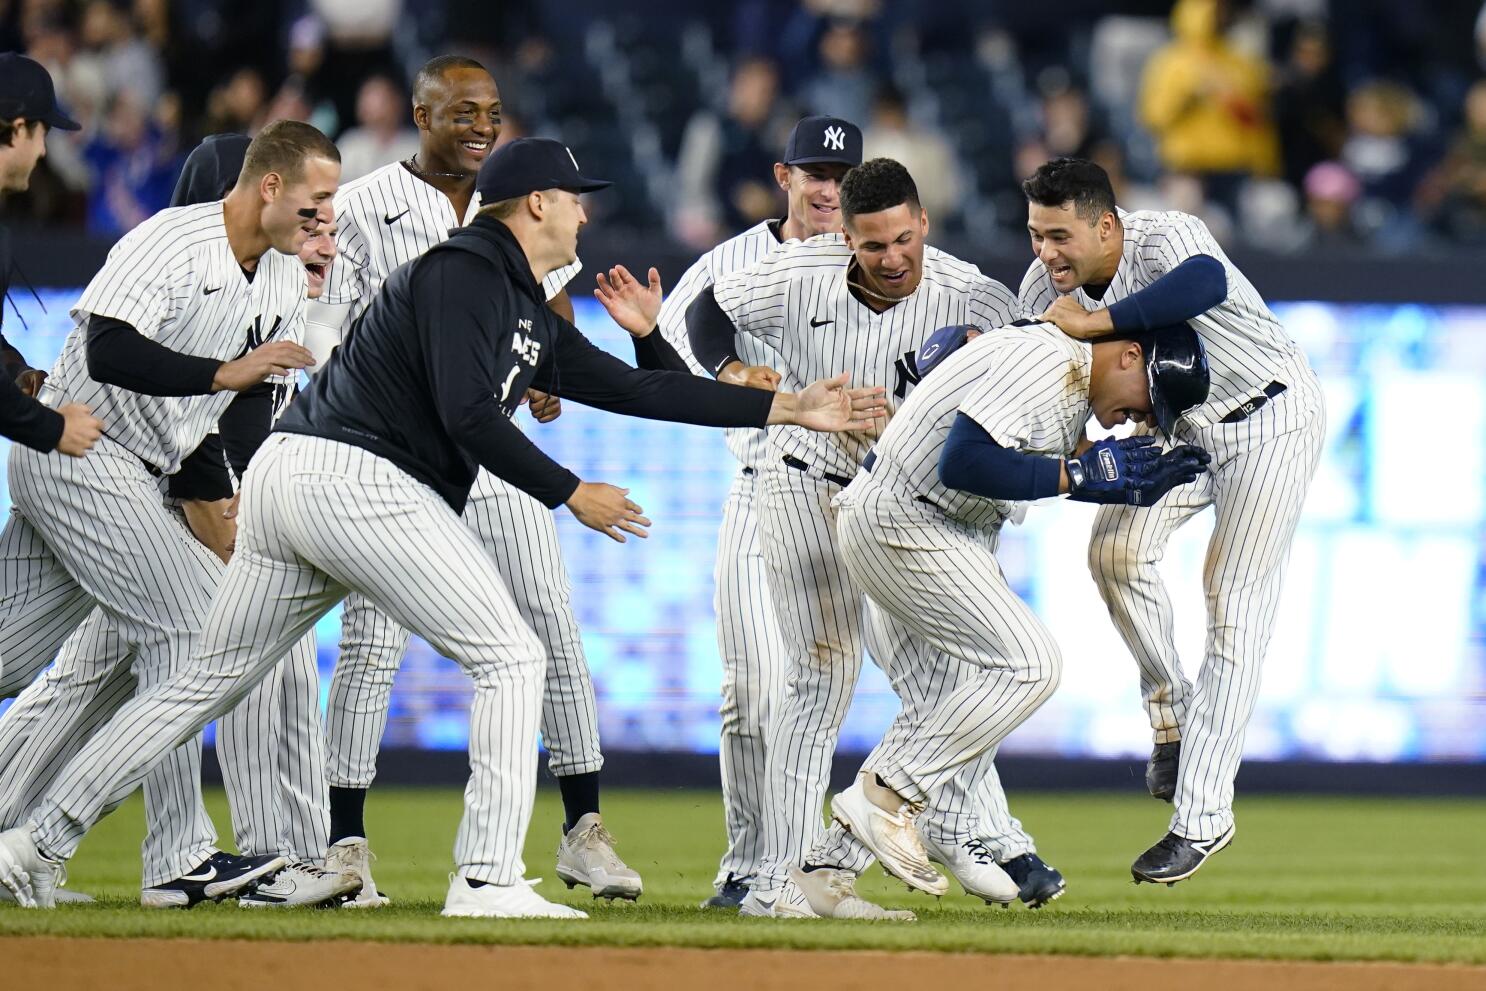 Emotional Trevino delivers for Yanks on late dad's birthday - The